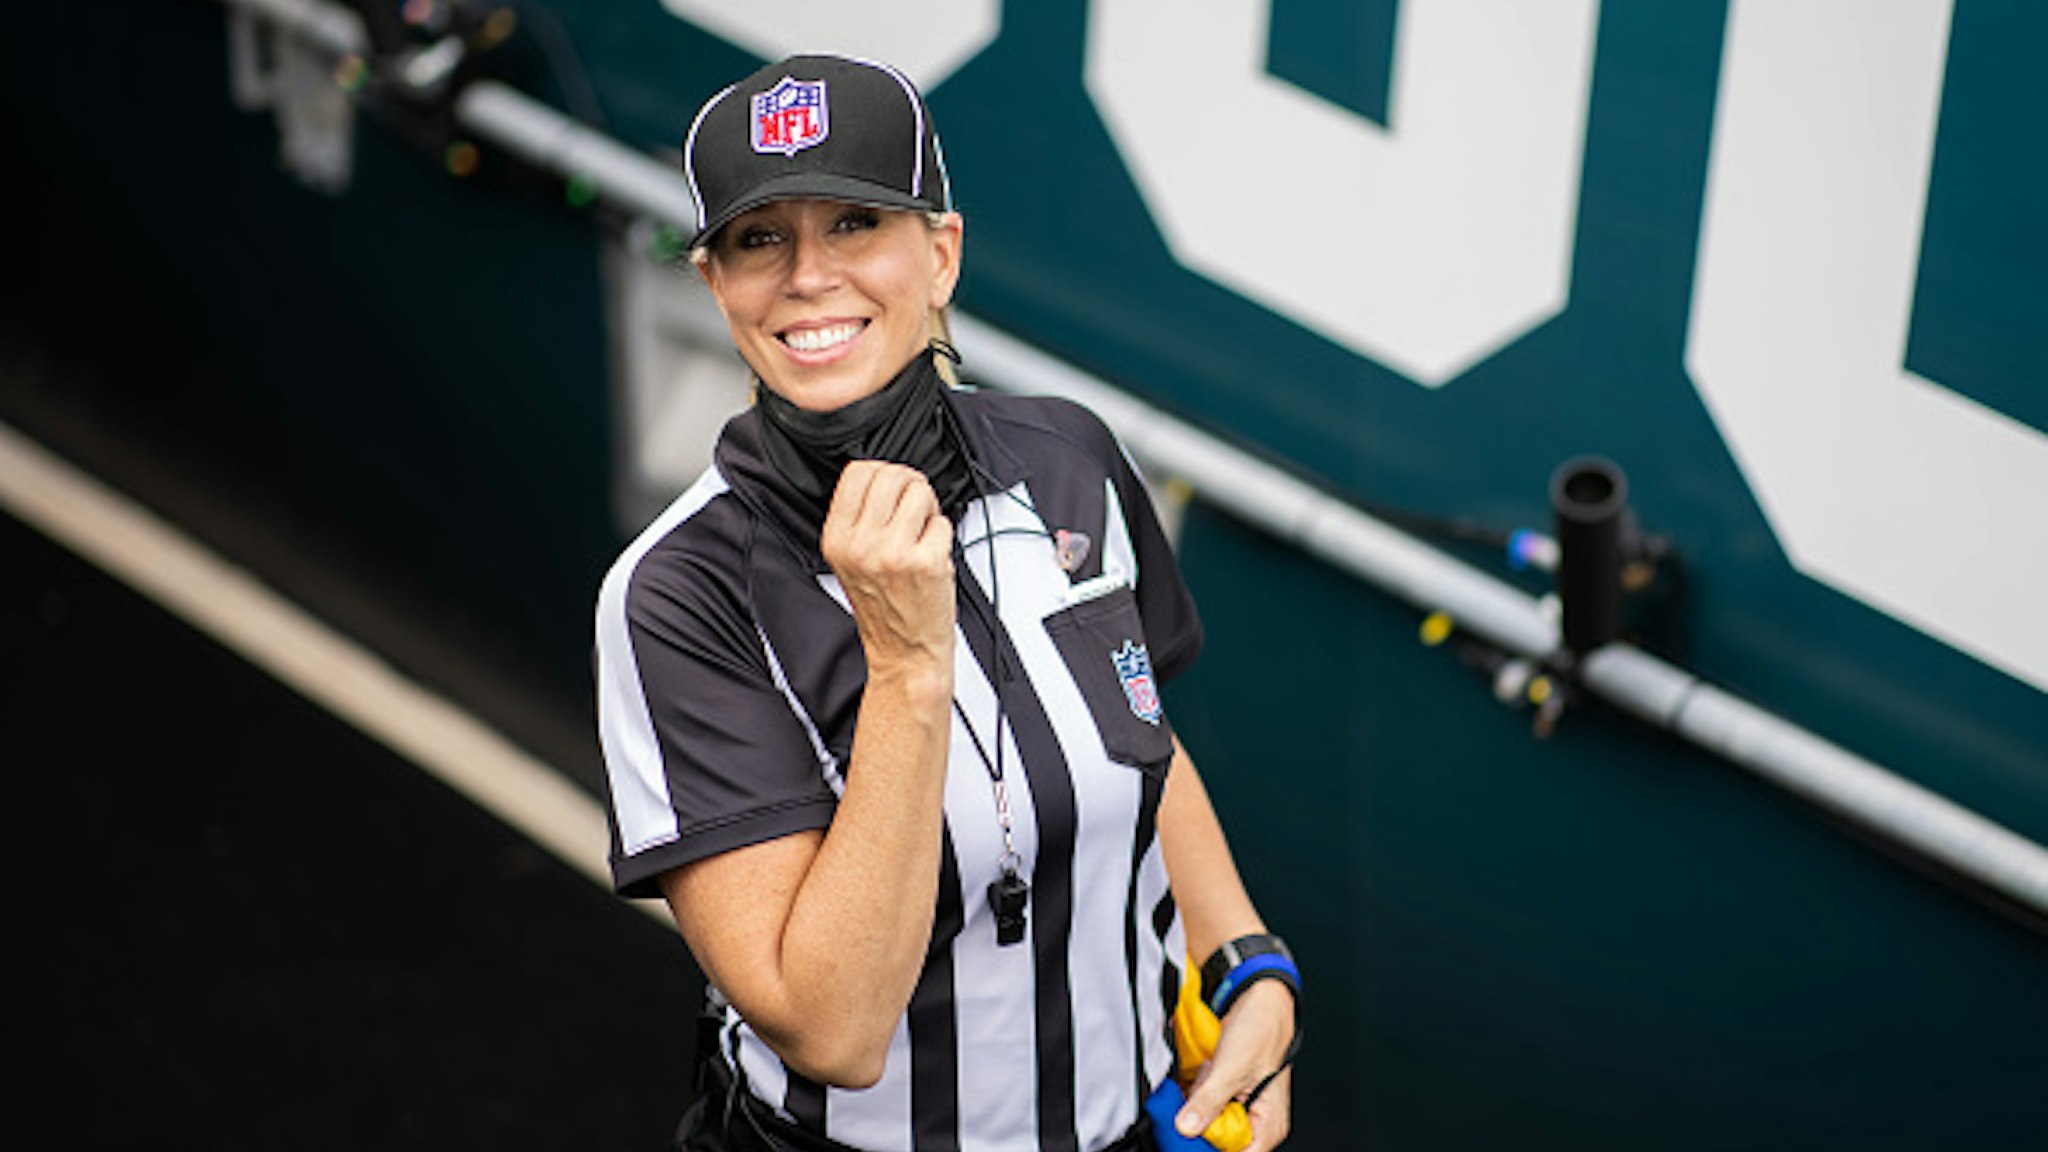 JACKSONVILLE, FLORIDA - OCTOBER 18: Line judge Sarah Thomas #53 poses for a photo before the start of a game between the Detroit Lions and the Jacksonville Jaguars at TIAA Bank Field on October 18, 2020 in Jacksonville, Florida. (